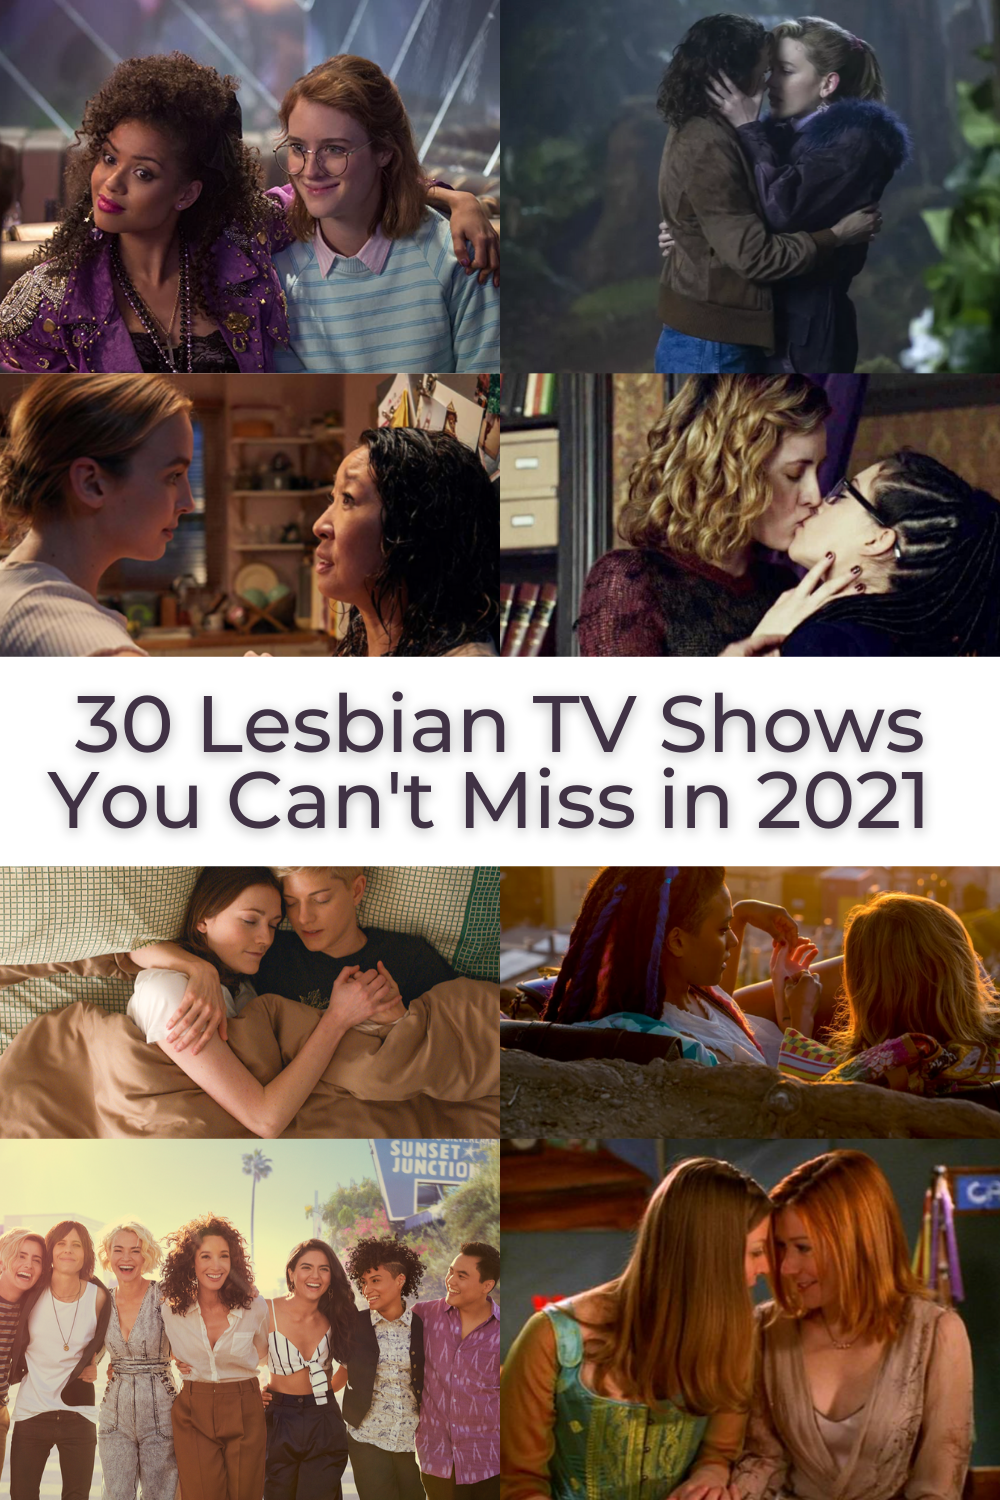 The 30 Best Queer and Lesbian TV Shows in 2021 pic photo